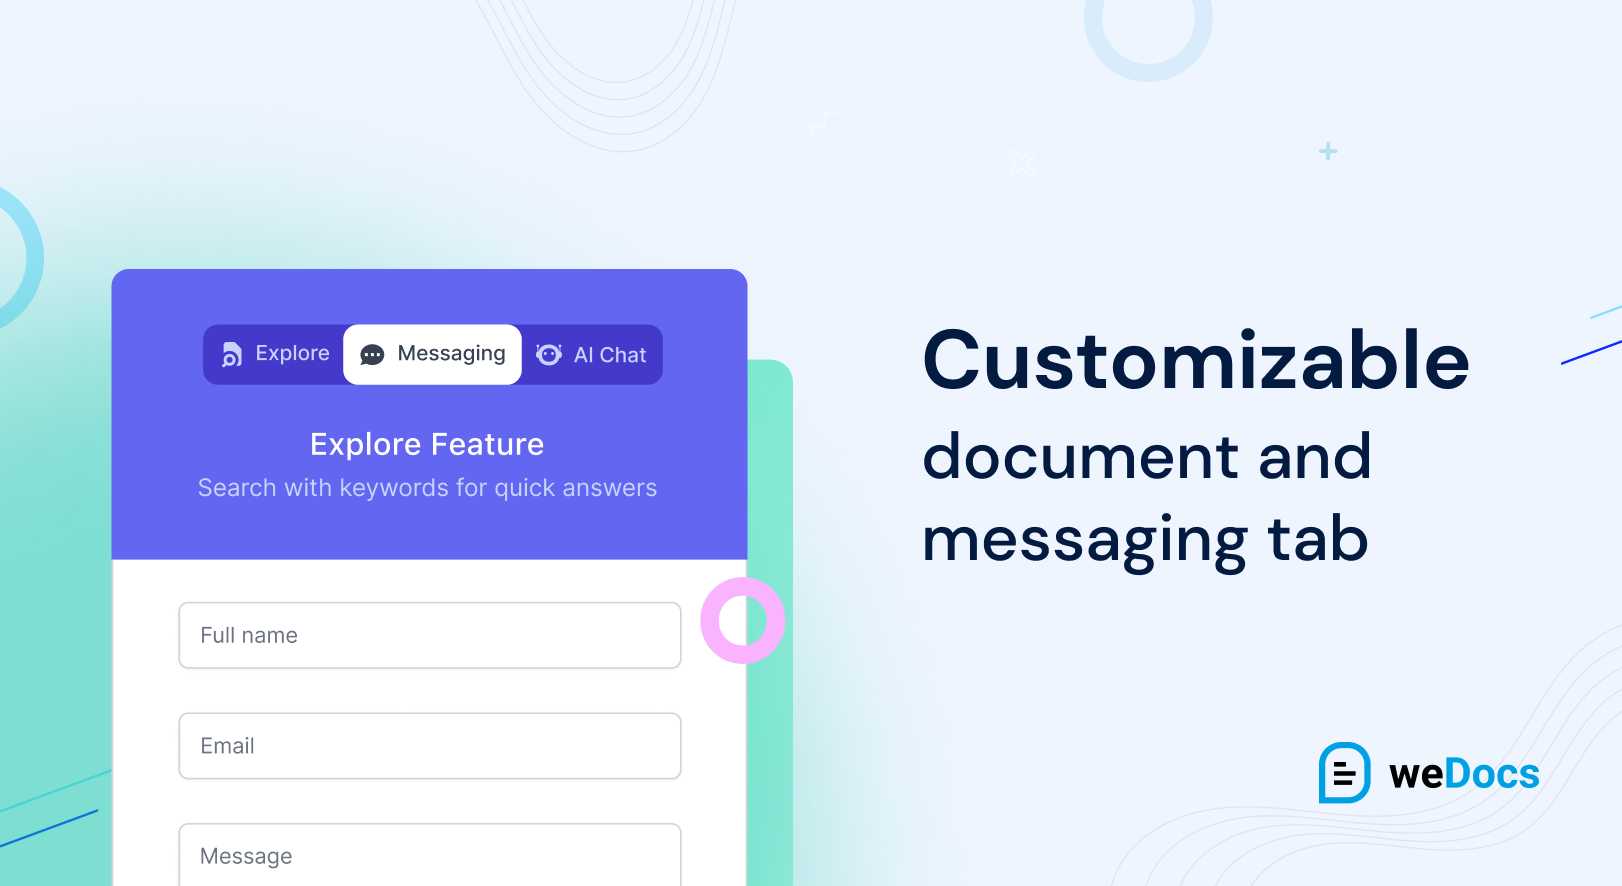 Customizable document and messaging tab